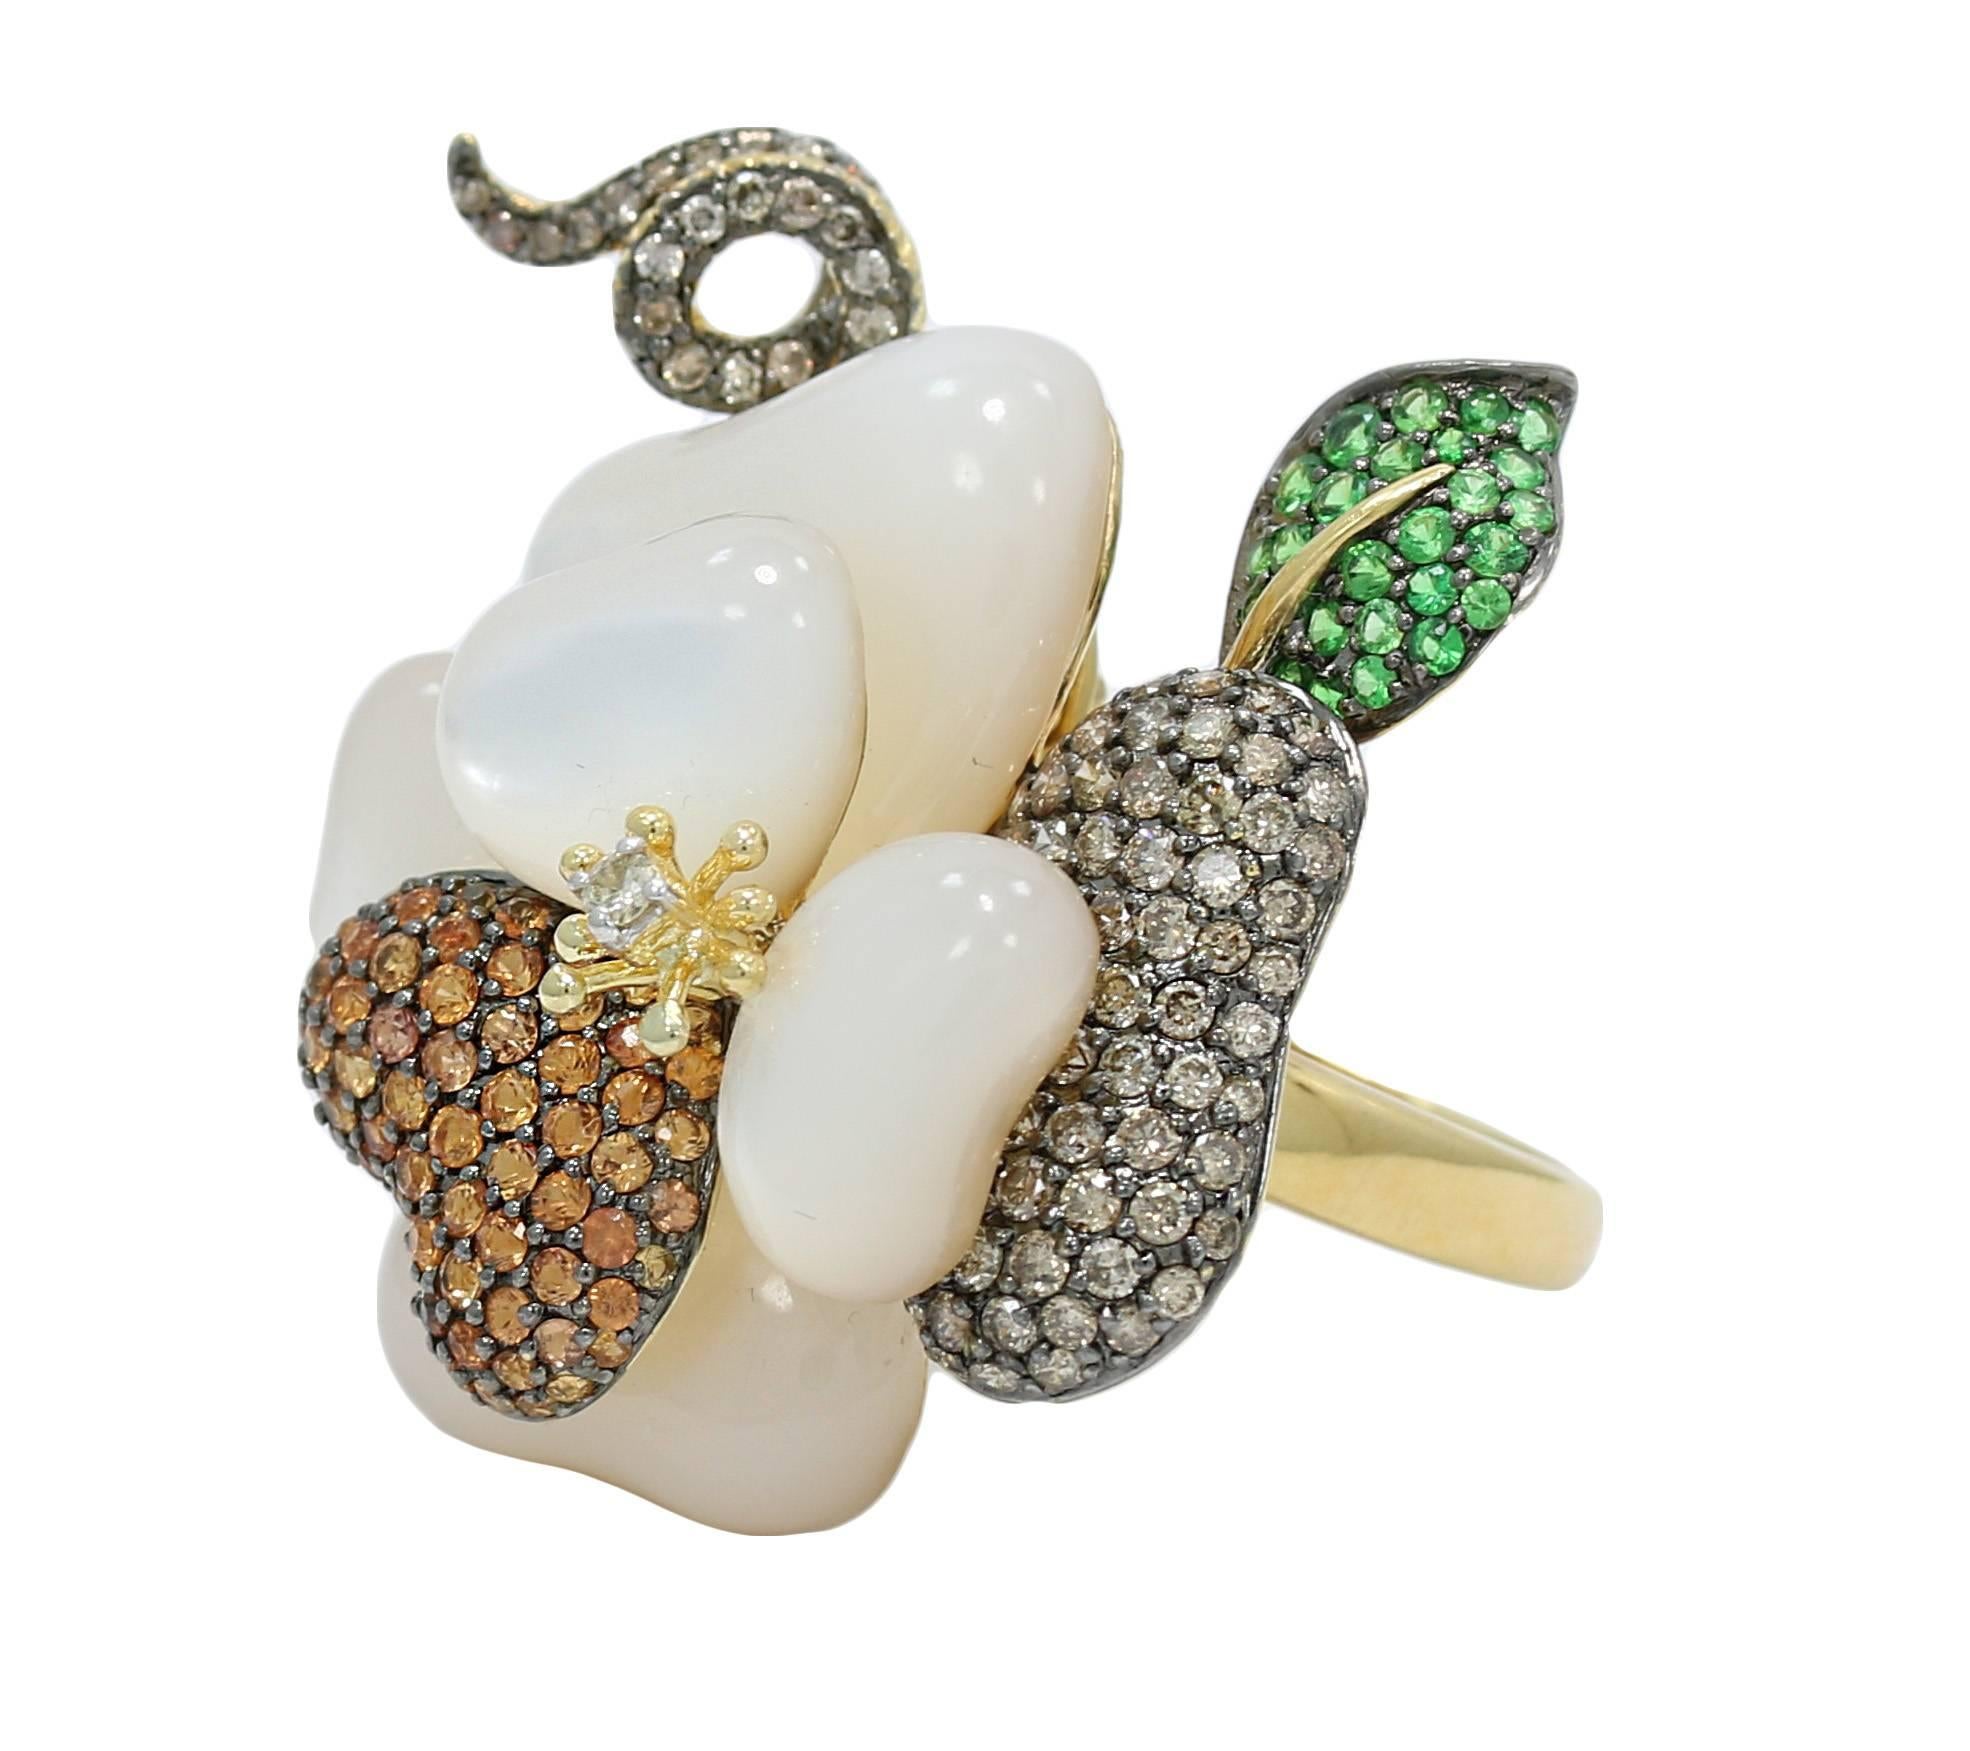 We have this beautiful 18k yellow gold mother of pearl diamond and semi precious stone ring/pendant. It measures 1.5